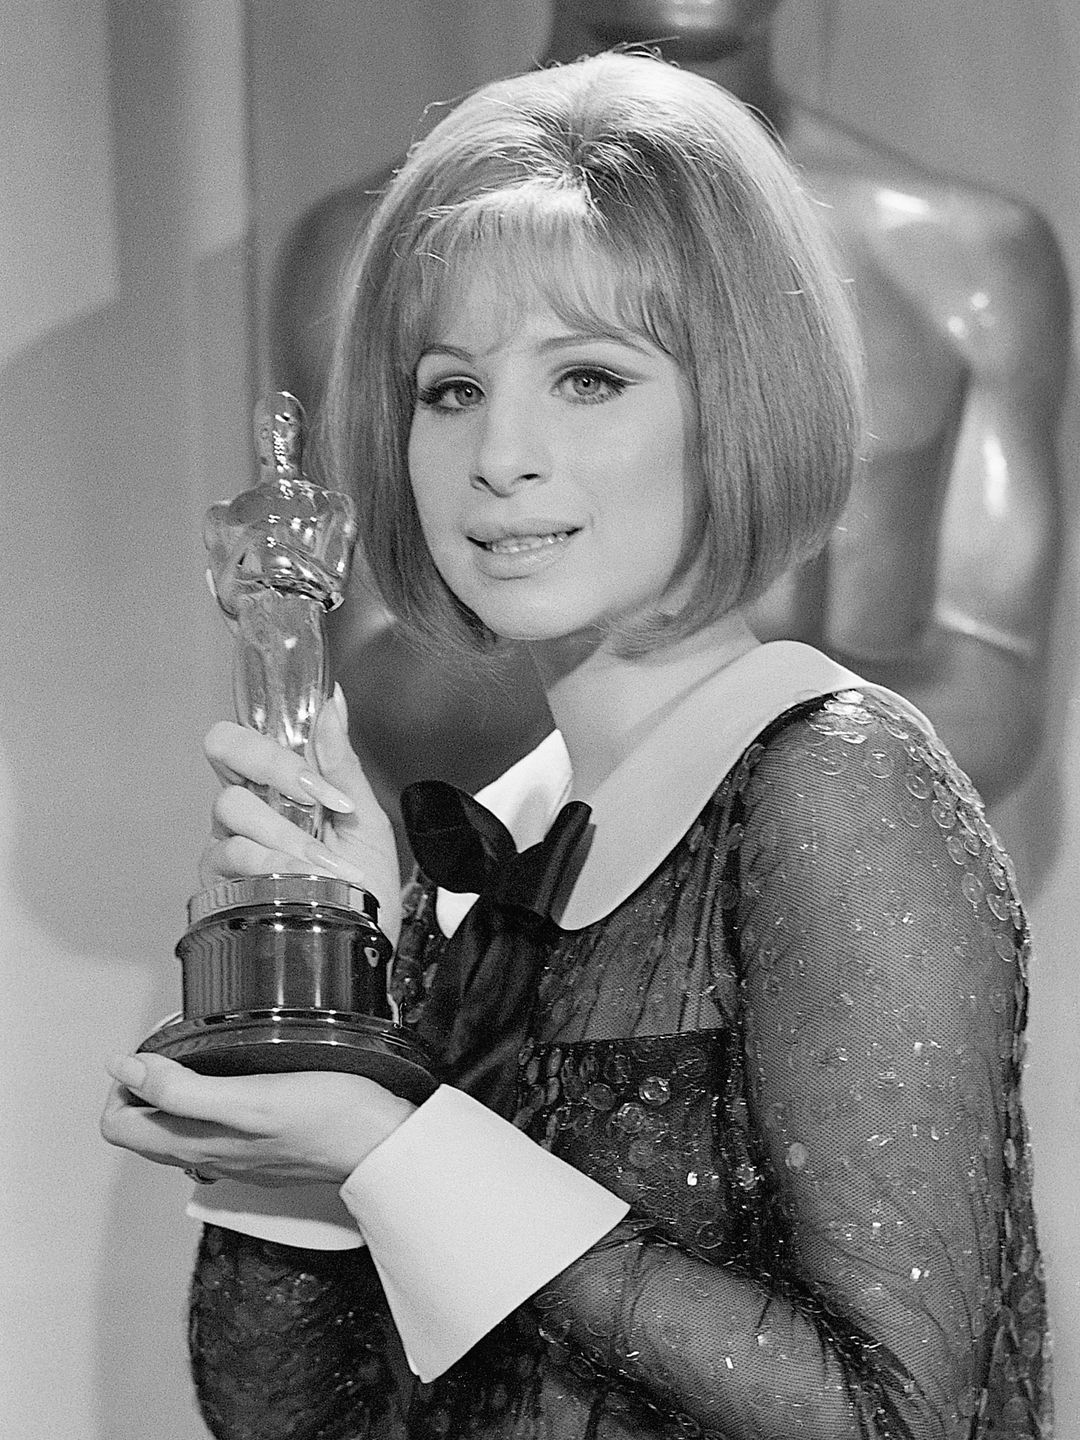 (Original Caption) 4/14/69-Los Angeles, CA- Barbra Streisand holds her "Oscar" after she was named co-winner of the Best Actress Award in the 41st Annual Academy Awards. Streisand and Katharine Hepburn made Academy history with the dual award.